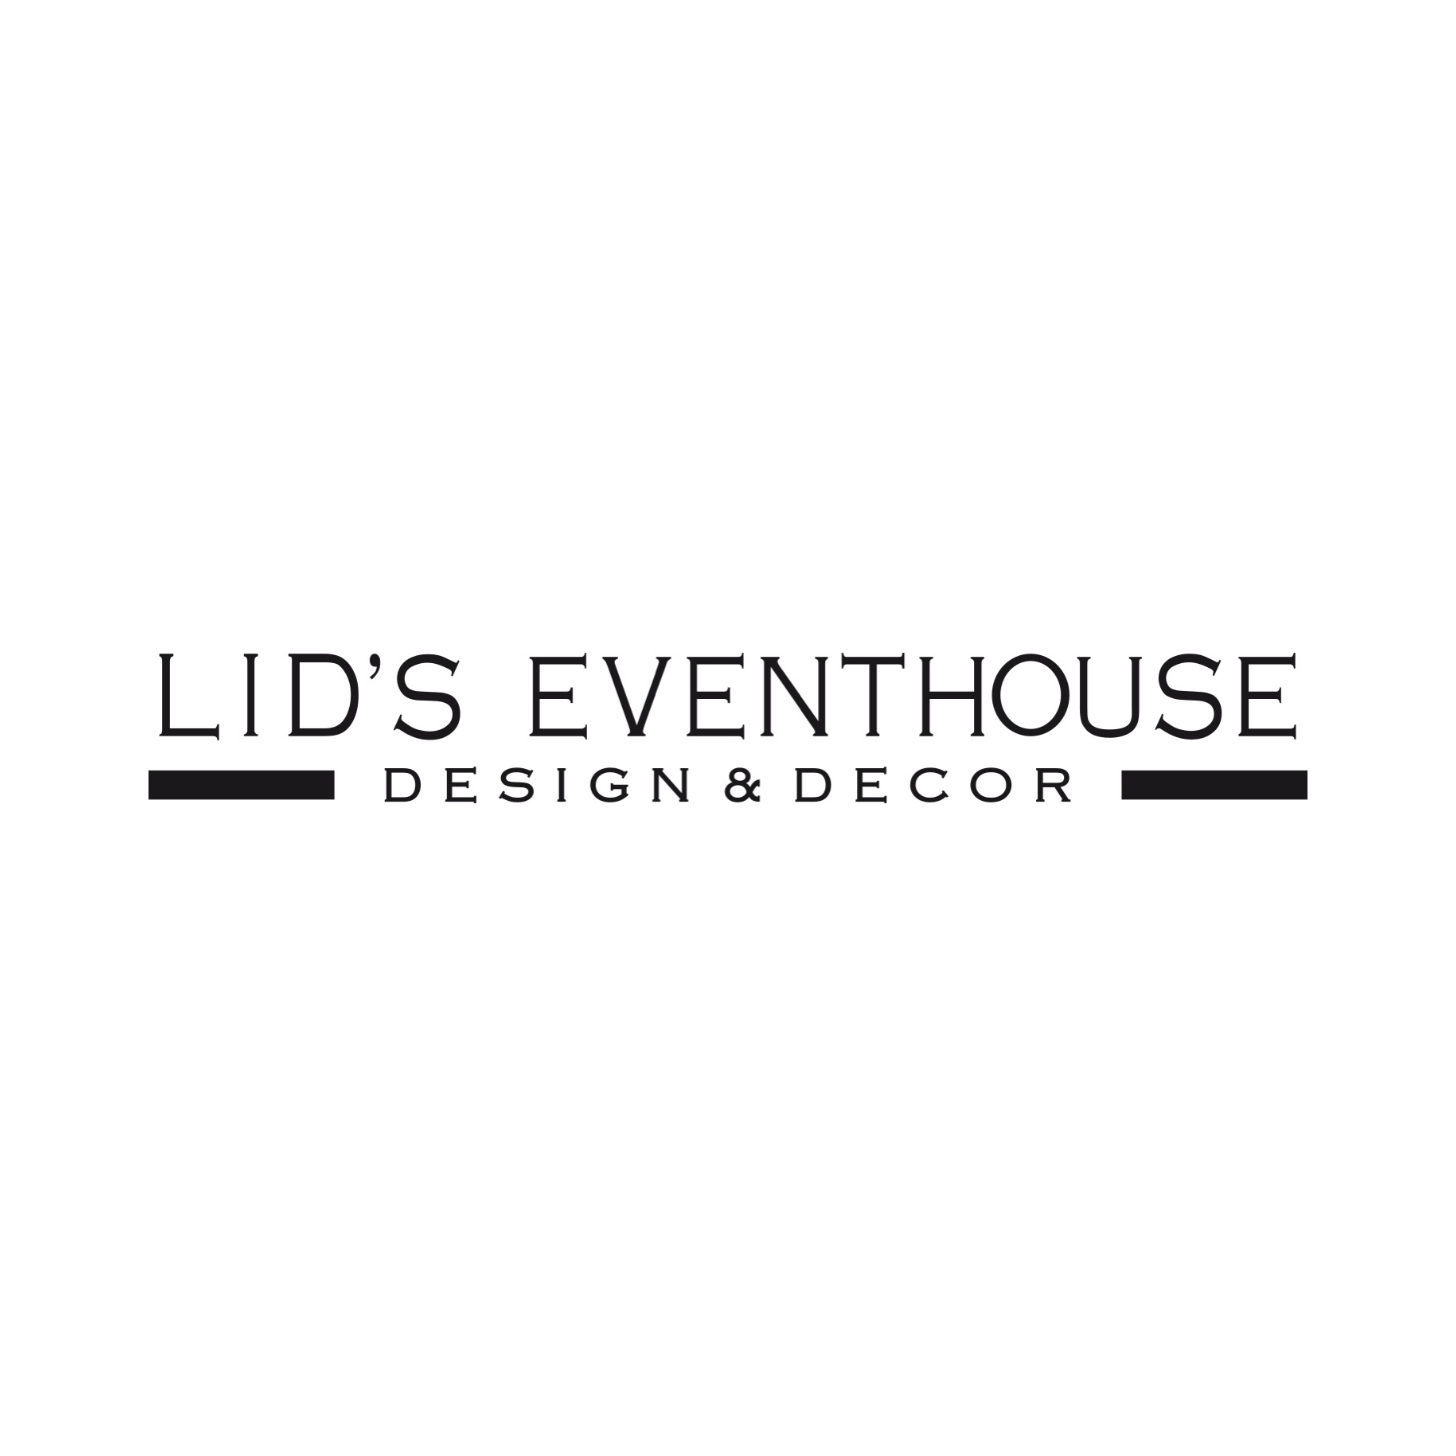 LID'S EVENTHOUSE